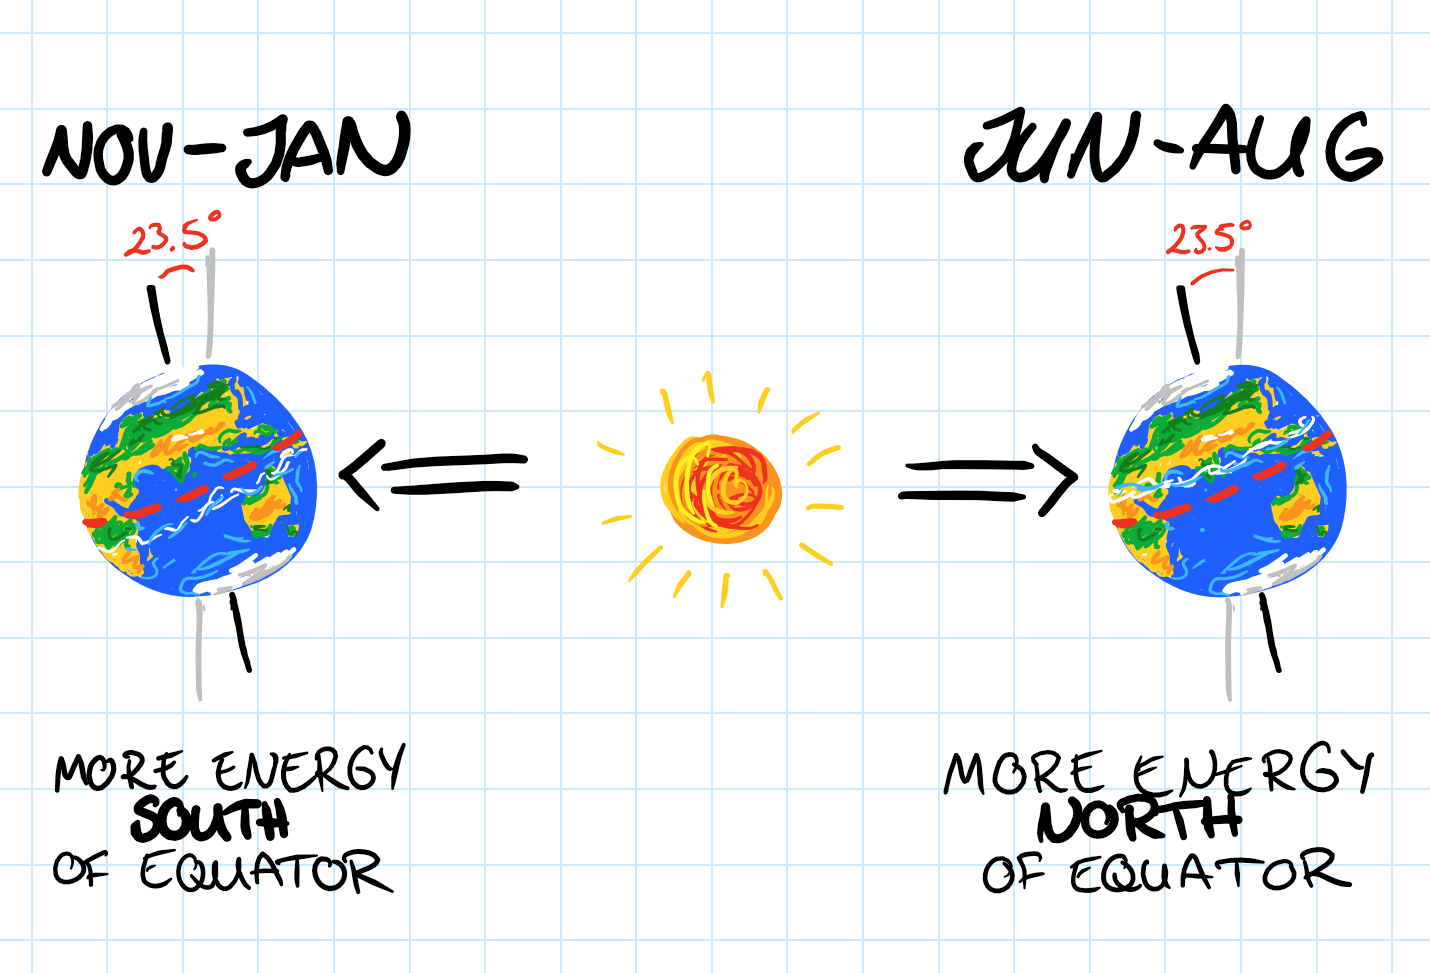 Awesome hand drawn graphic showing the southern hemisphere tilted towards the sun in our summer but away in winter